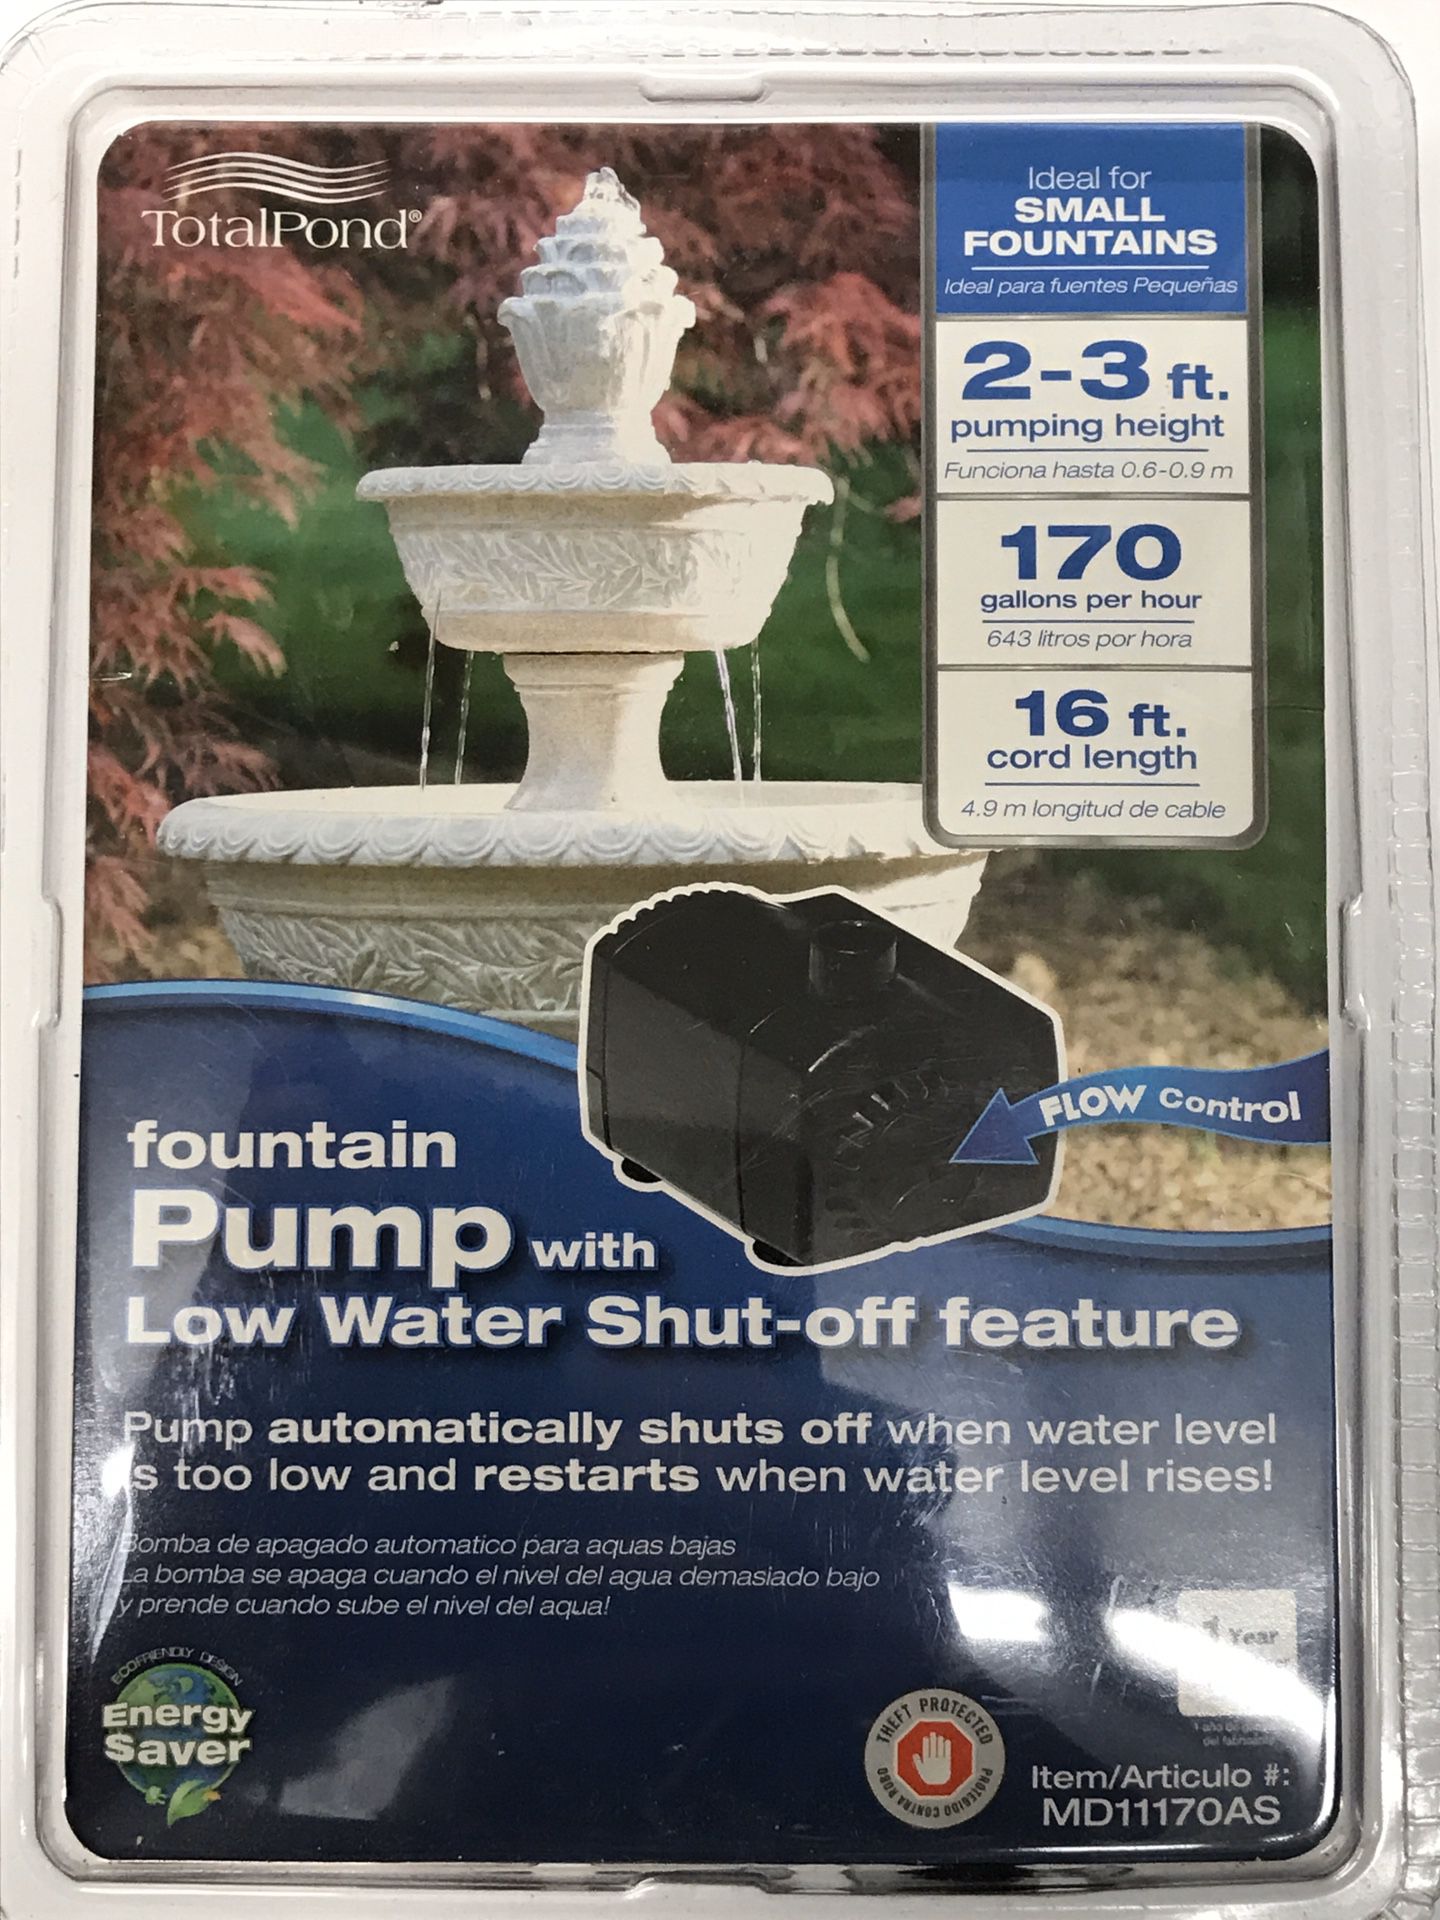 Total Pond 170 GPH Low Water Shut-Off Fountain Pump.